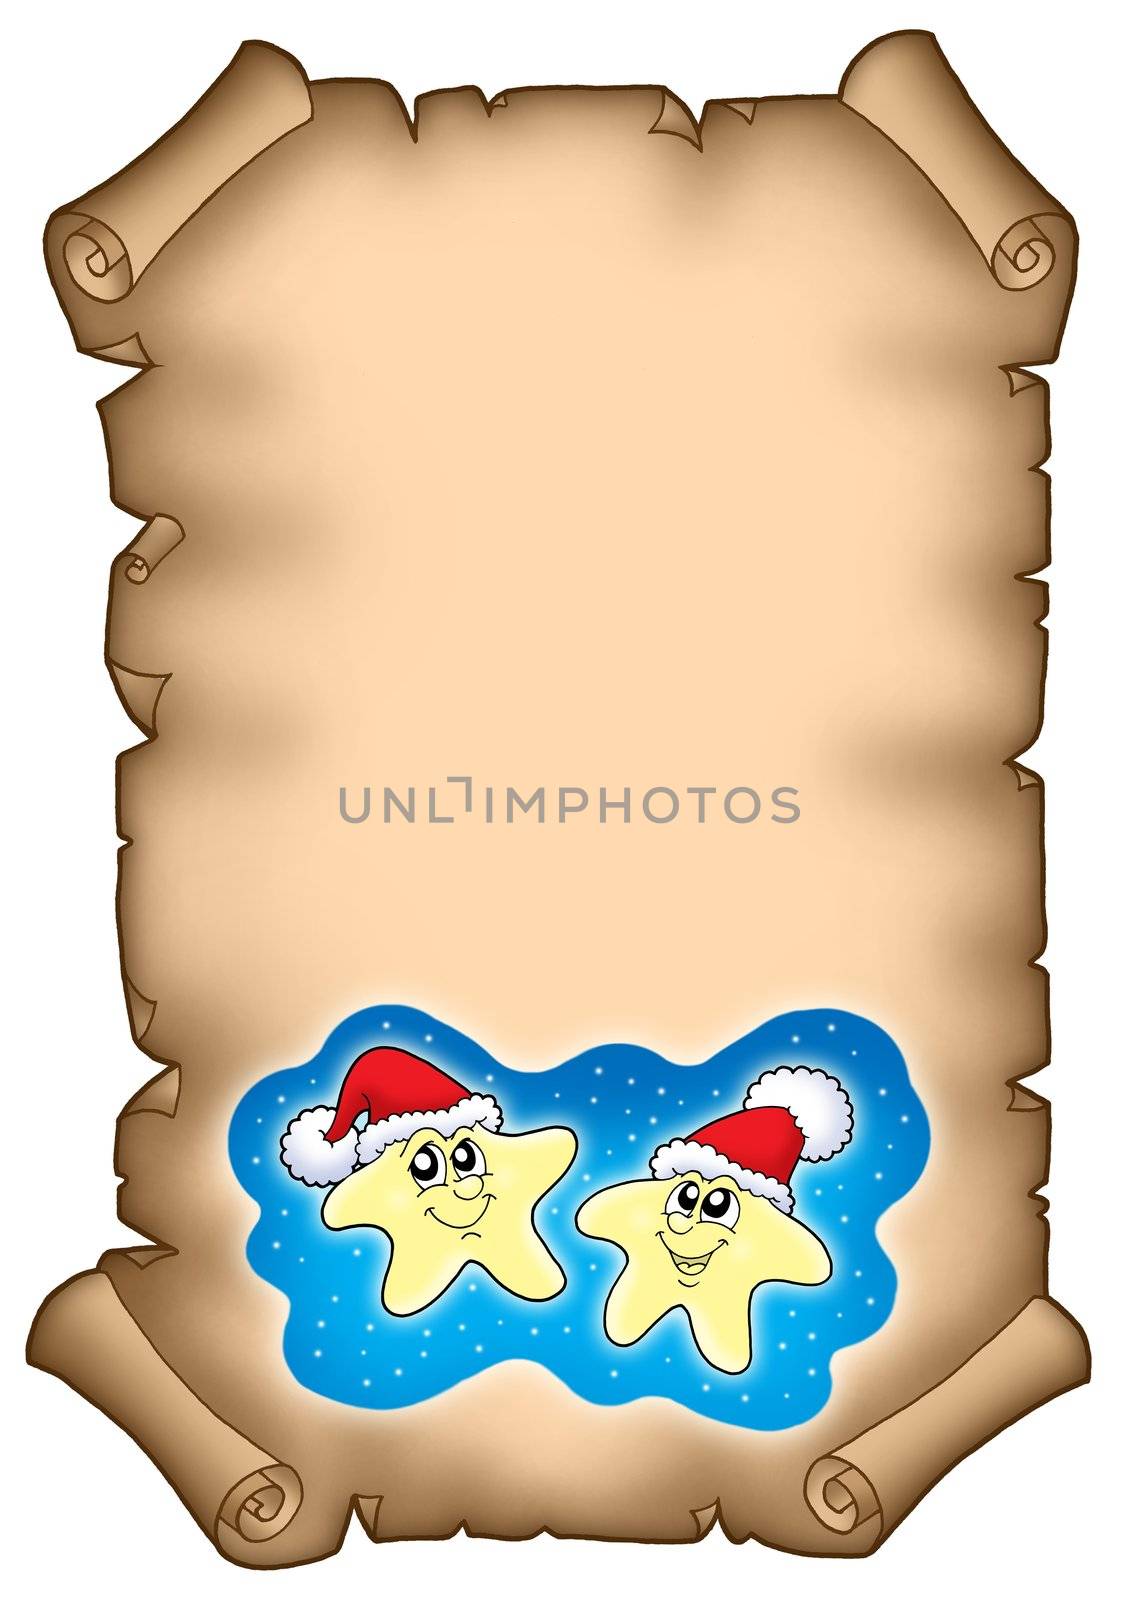 Christmas parchment with stars - color illustration.